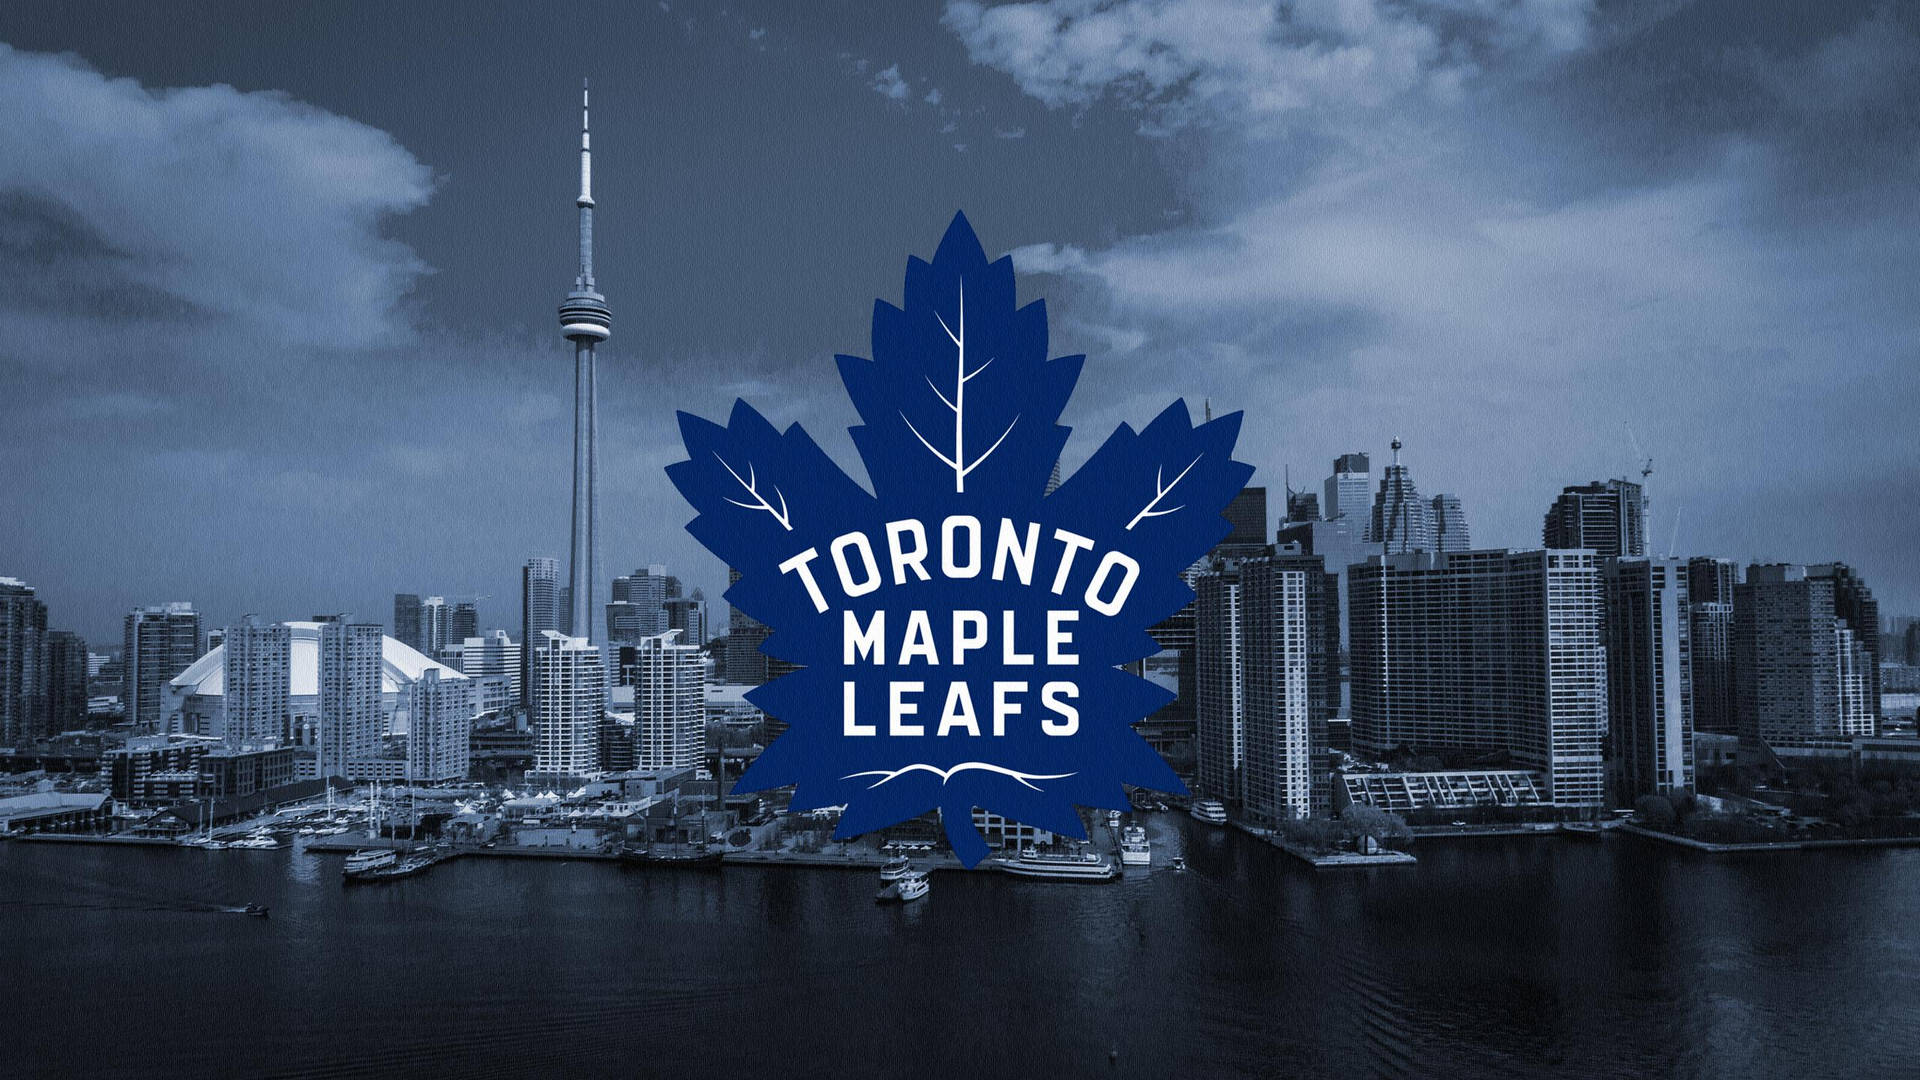 Toronto Maple Leafs (NHL) iPhone X/XS/XR Home Screen Wallp… | Flickr